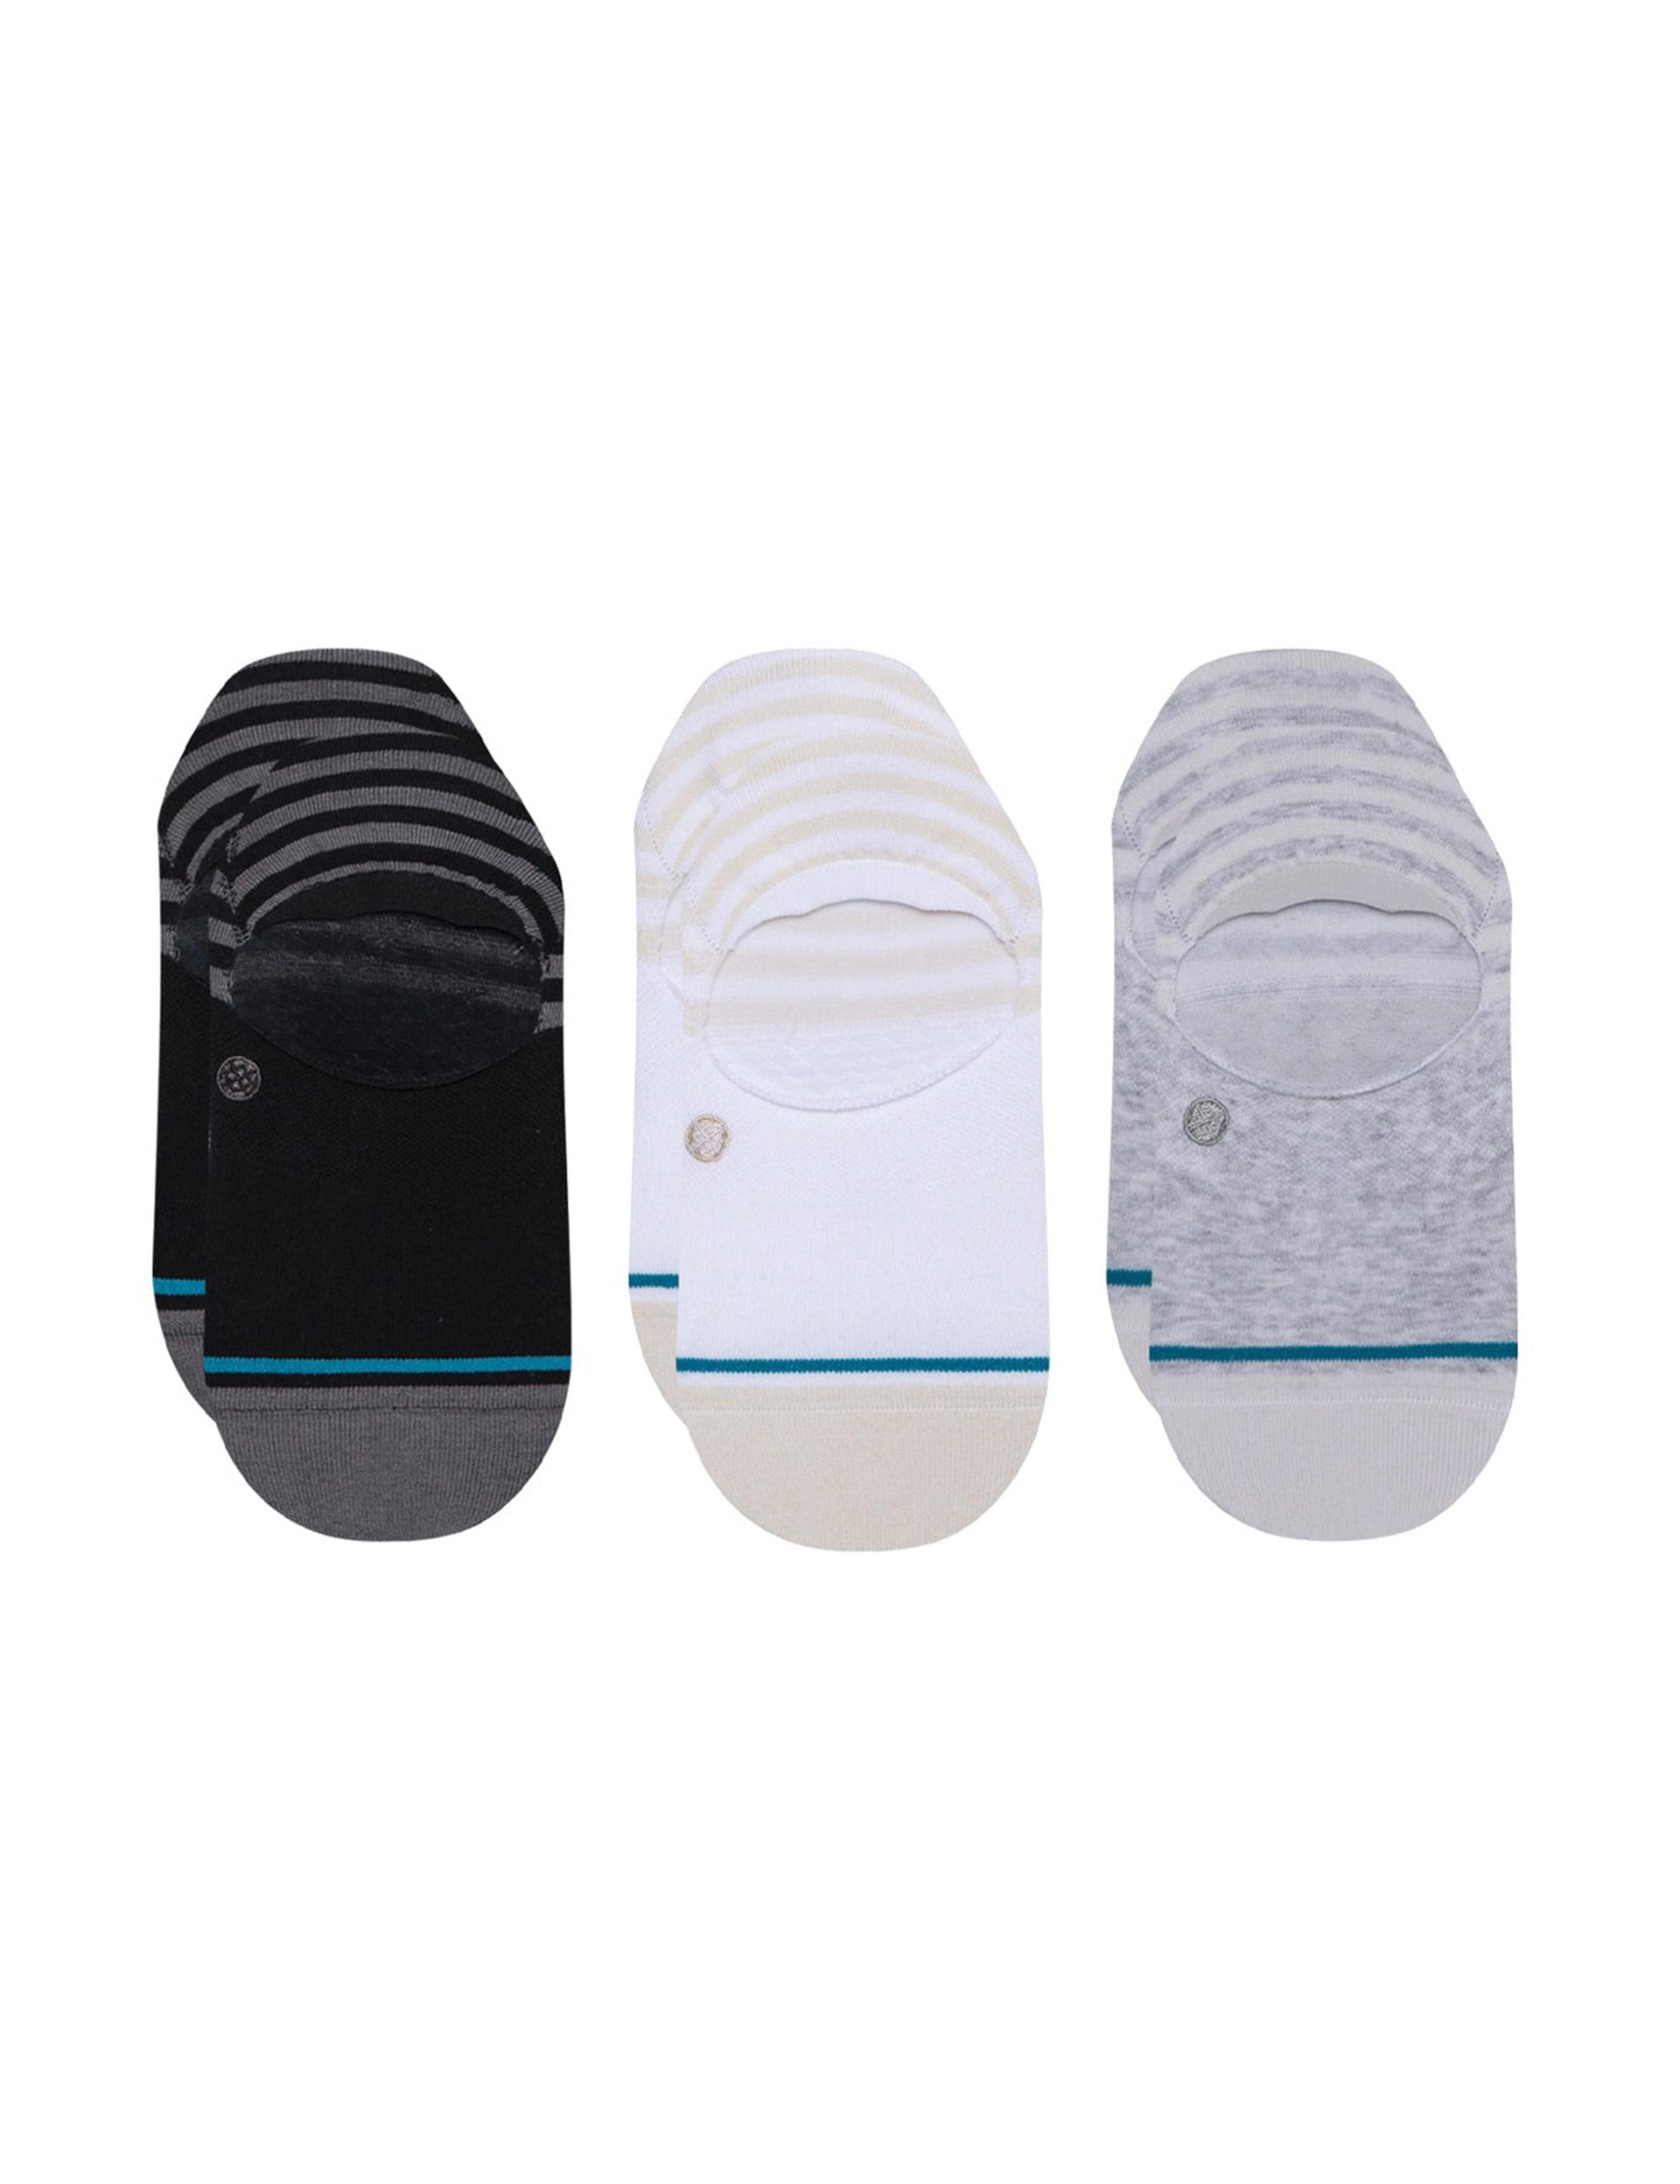 Stance Sensible Two Socks 3 Pack - Multiimage2- The Sports Edit